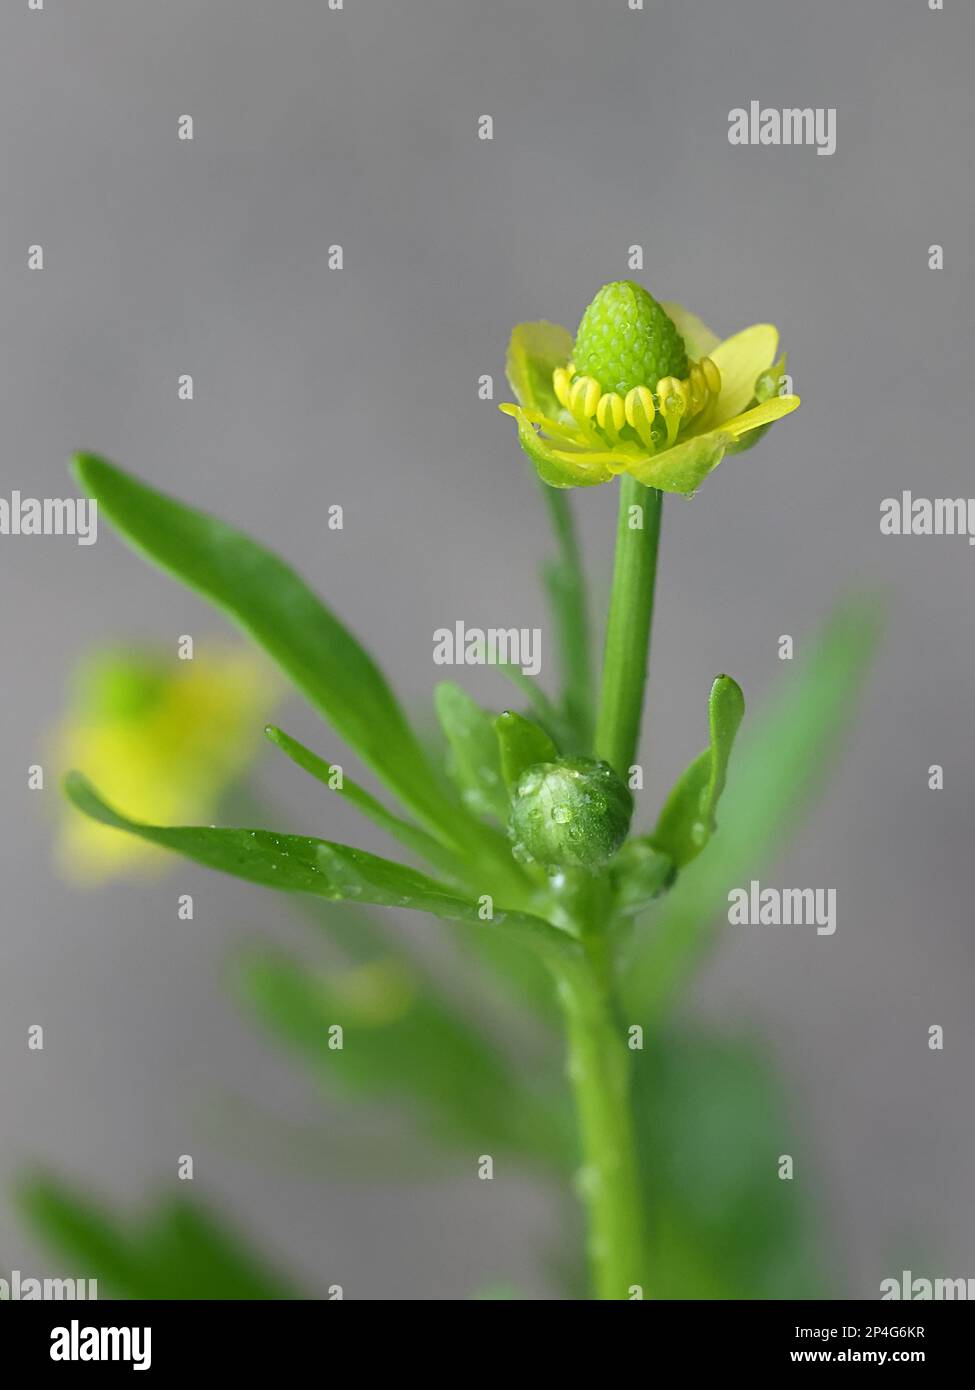 Celery-leaved Crowfoot, Ranunculus sceleratus, also known as Blister buttercup, Celery-leaved buttercup or Crowfoot buttercup, wild flower from Finlna Stock Photo